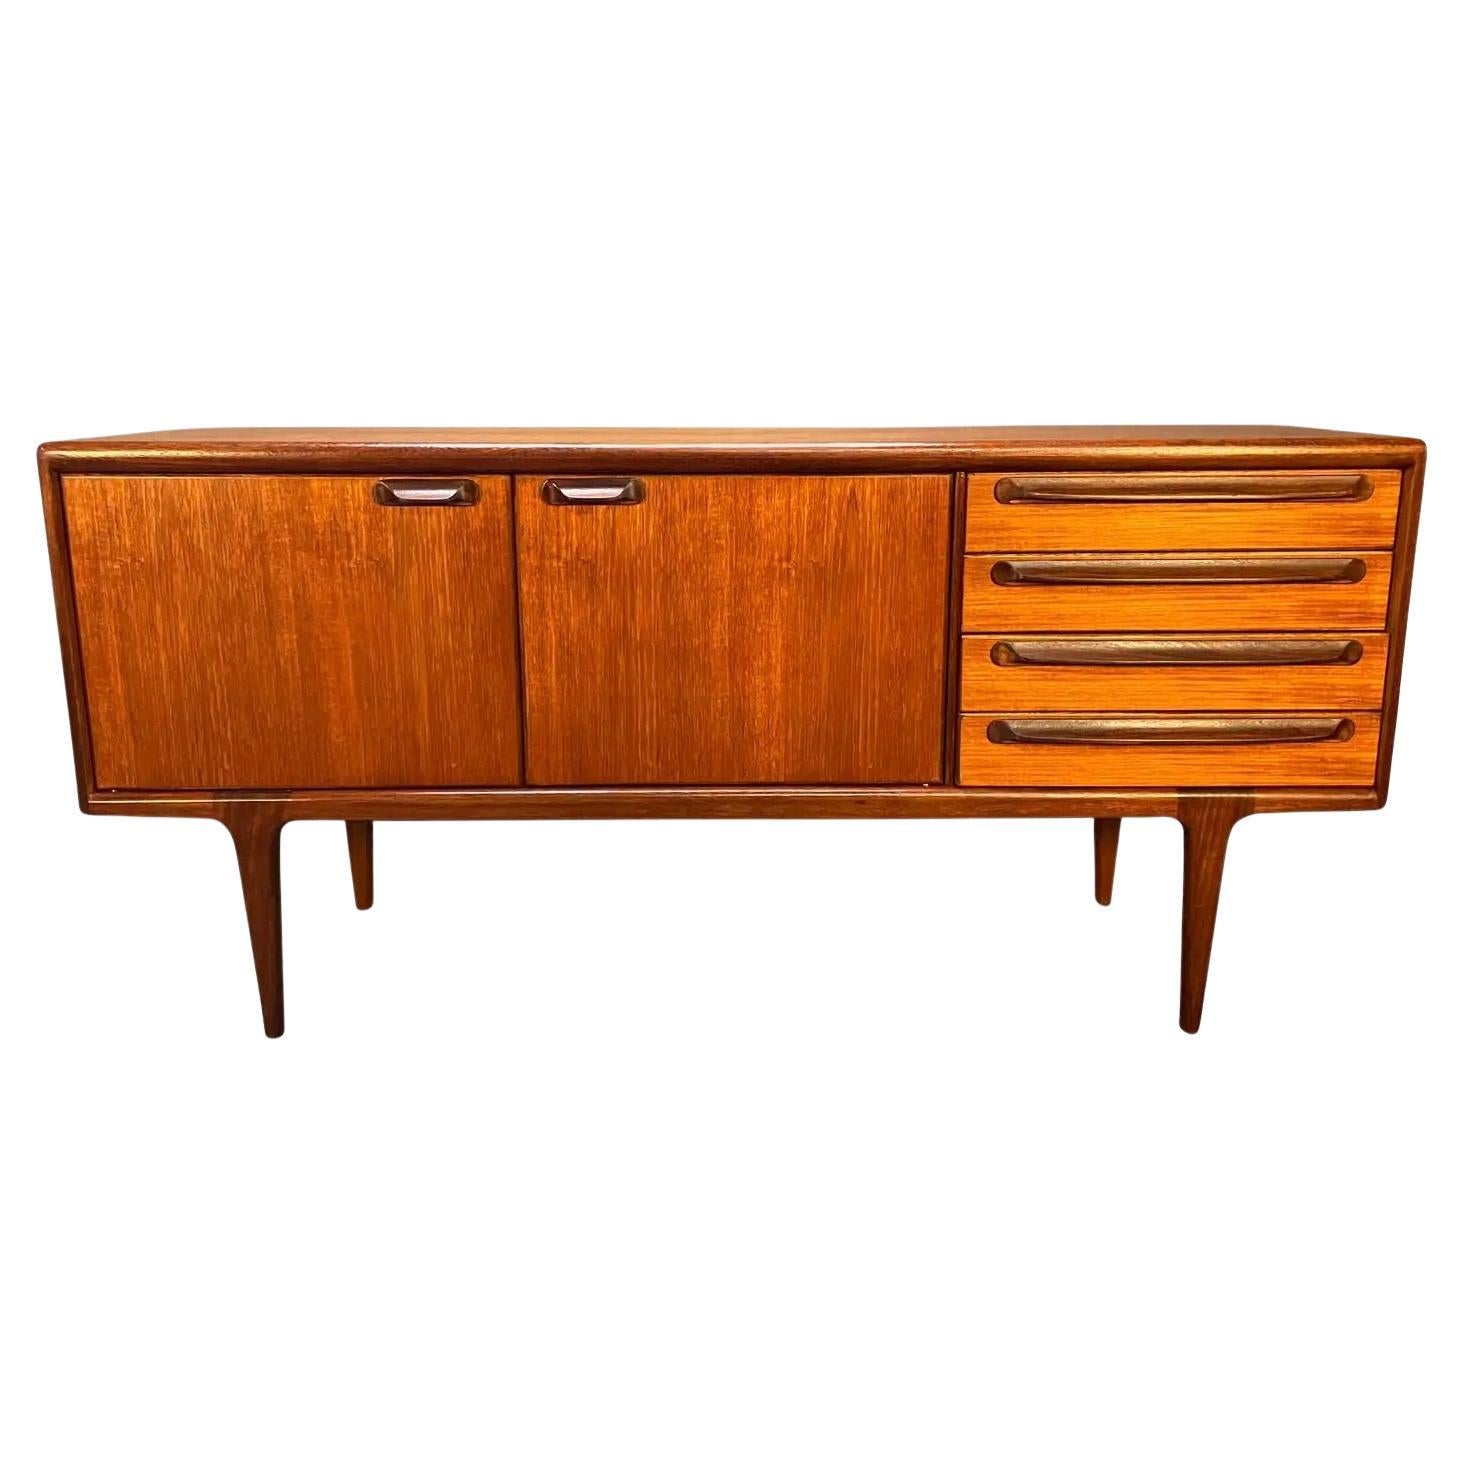 Vintage British Mid-Century Teak "Sequence" Compact Credenza by A. Younger Ltd For Sale